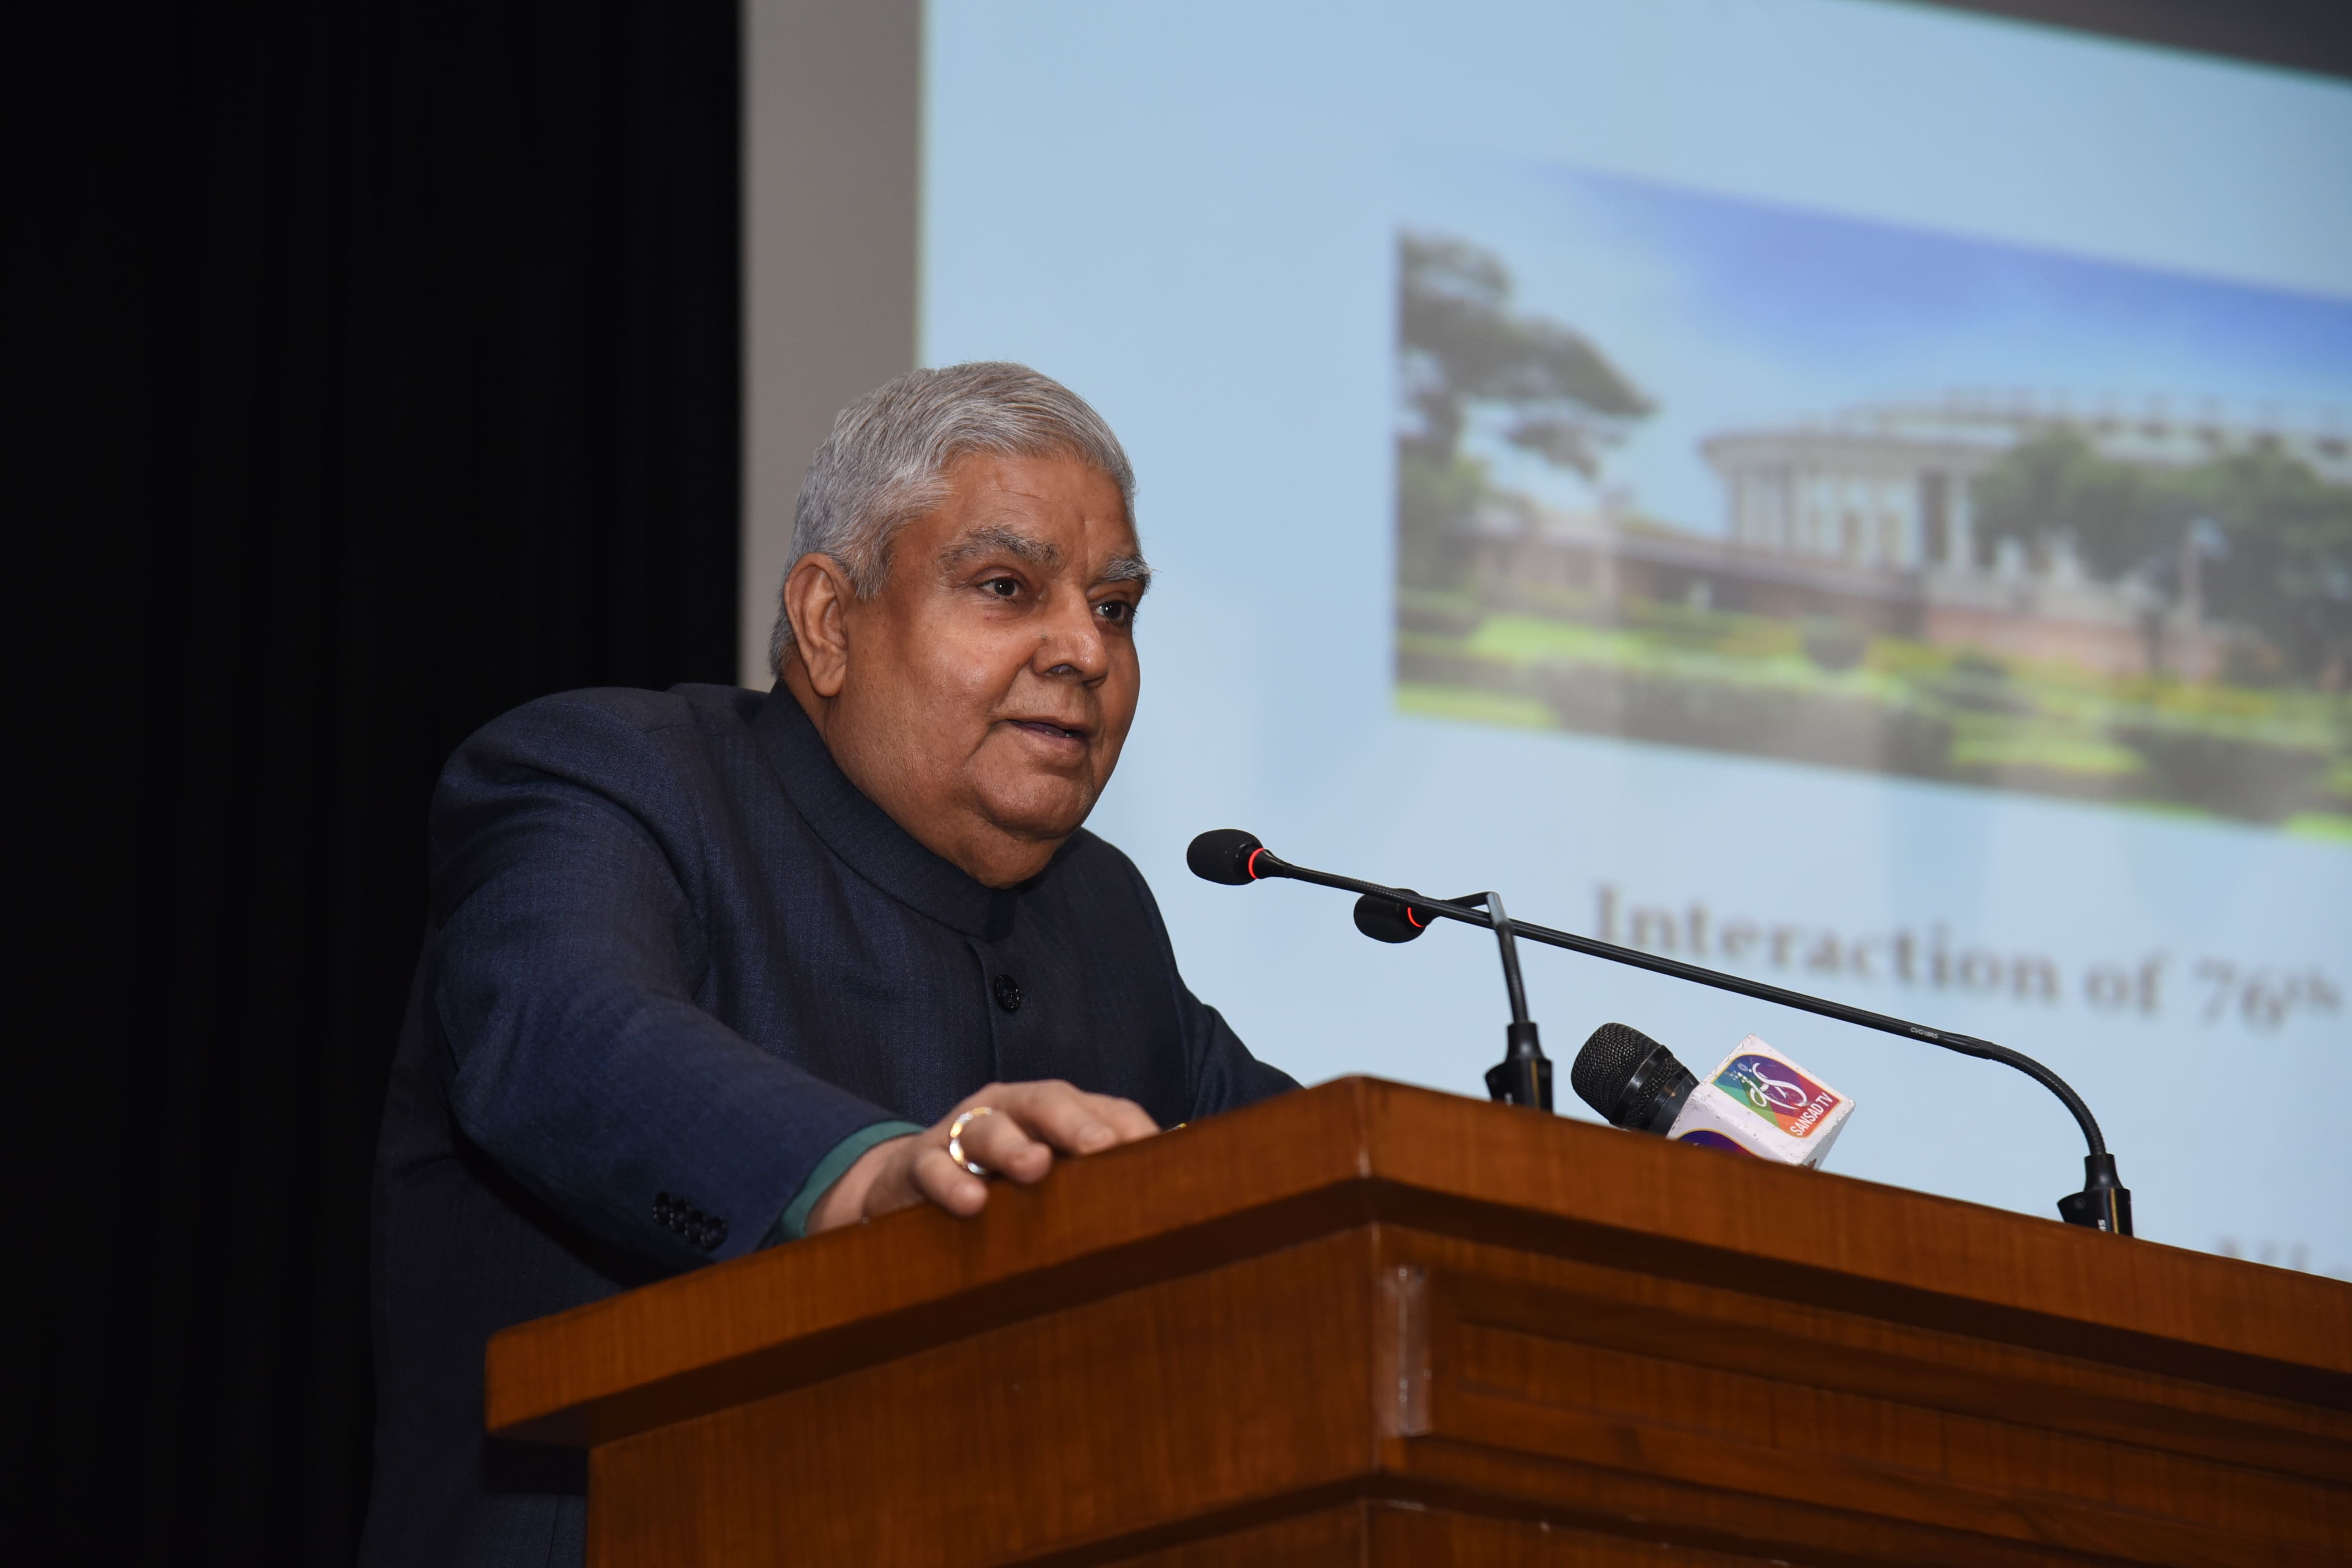 The Vice President, Shri Jagdeep Dhankhar addressing the Officer Trainees of the 76th batch of Indian Revenue Services at  Parliament House Complex, New Delhi on March 13, 2023.